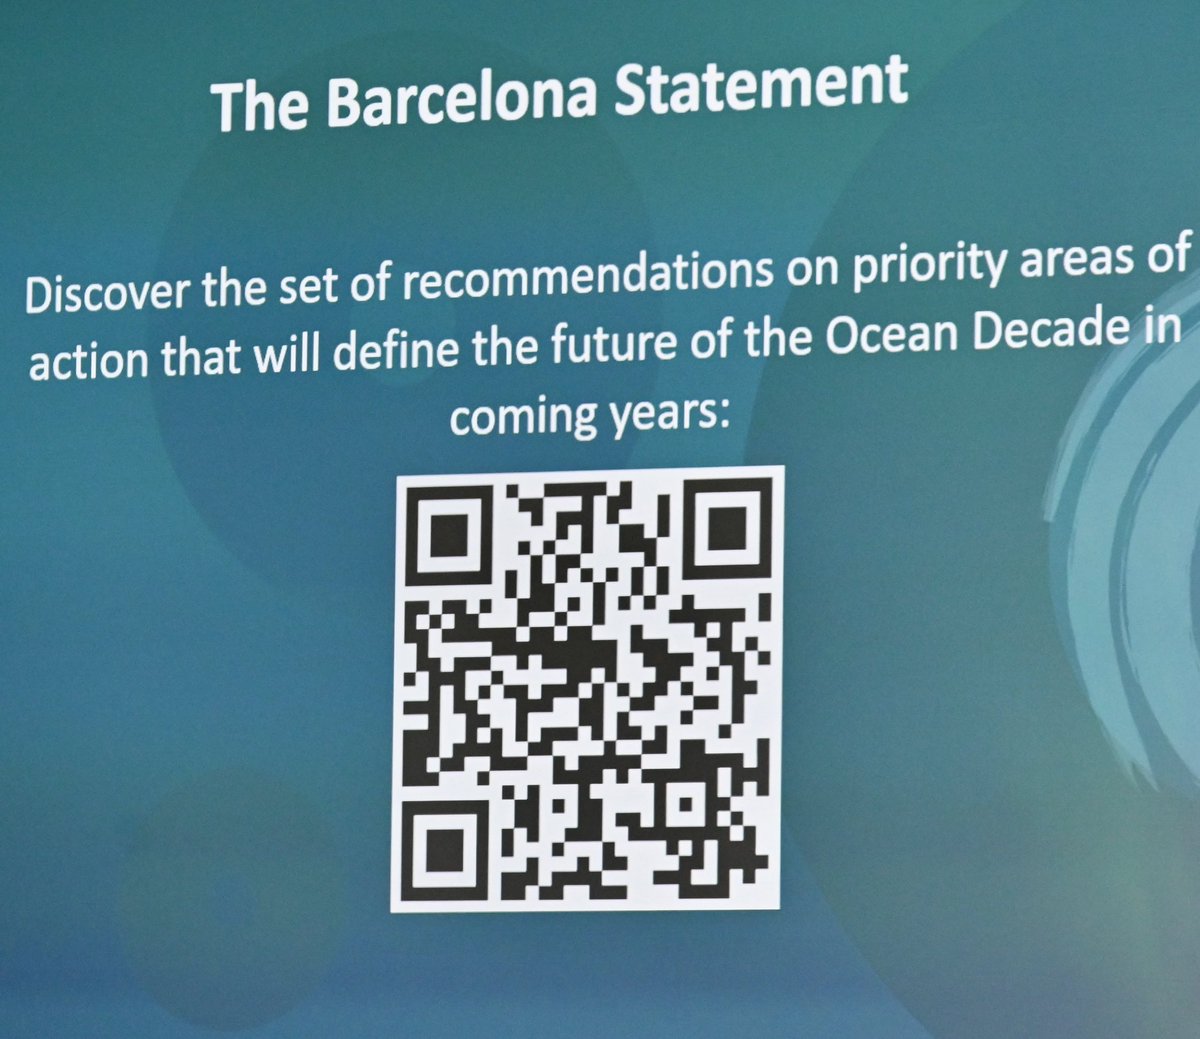 As we end the @UNOceanDecade Barcelona conference, @IocUnesco Executive Secretary Vidar Helgesen launches the #BarcelonaStatement that summarises what has been learned, and actions to follow. oceanexpert.org/document/34098